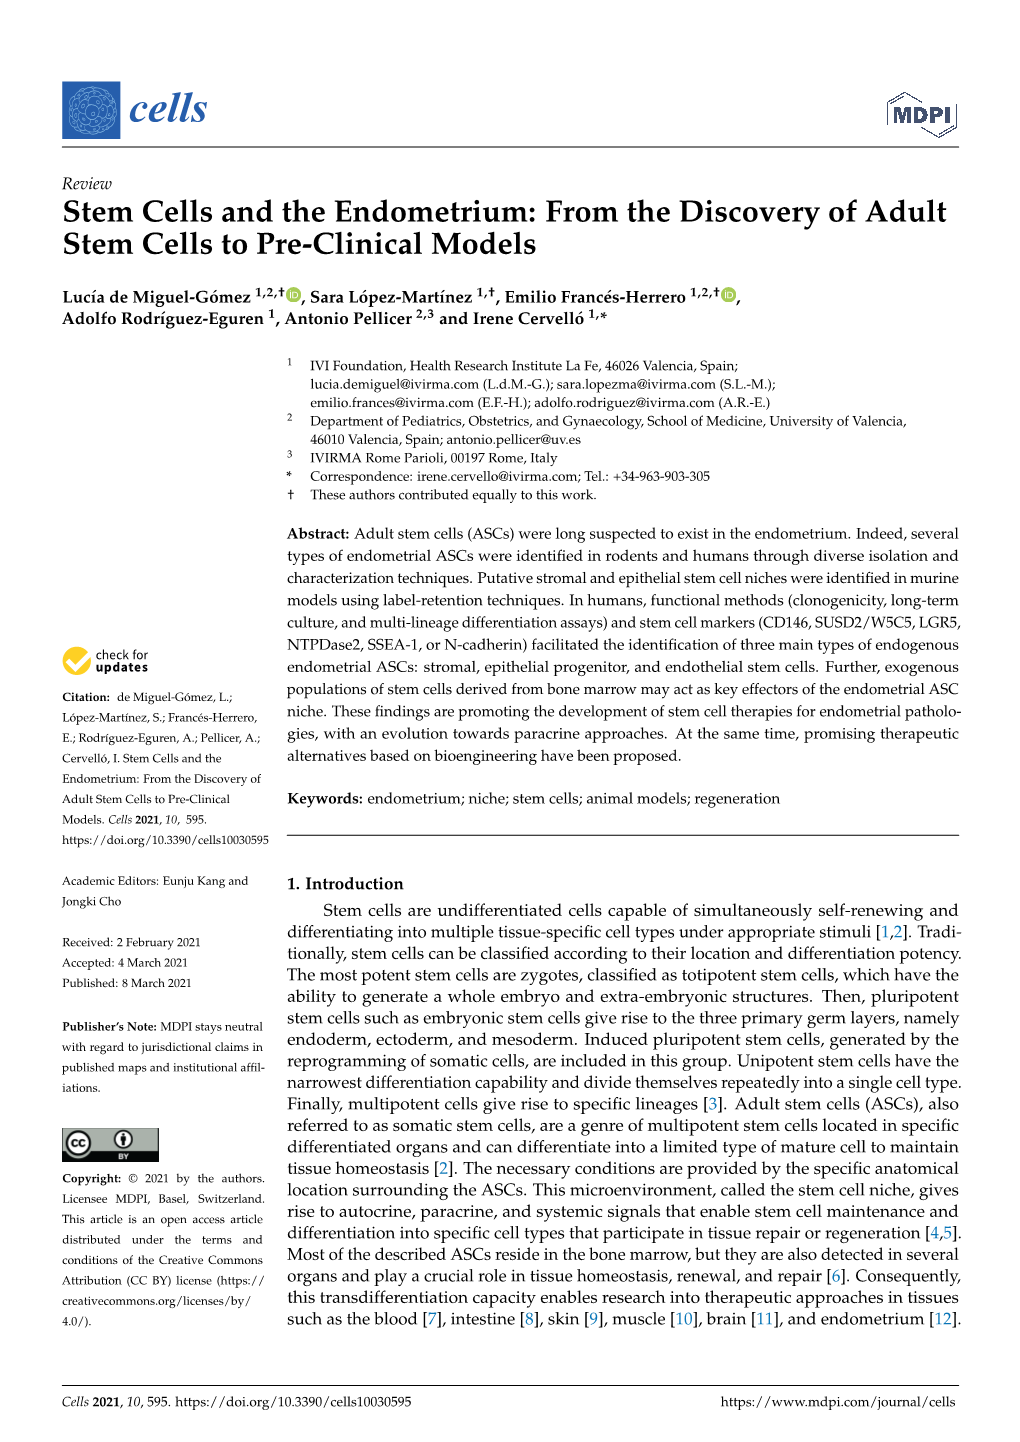 From the Discovery of Adult Stem Cells to Pre-Clinical Models